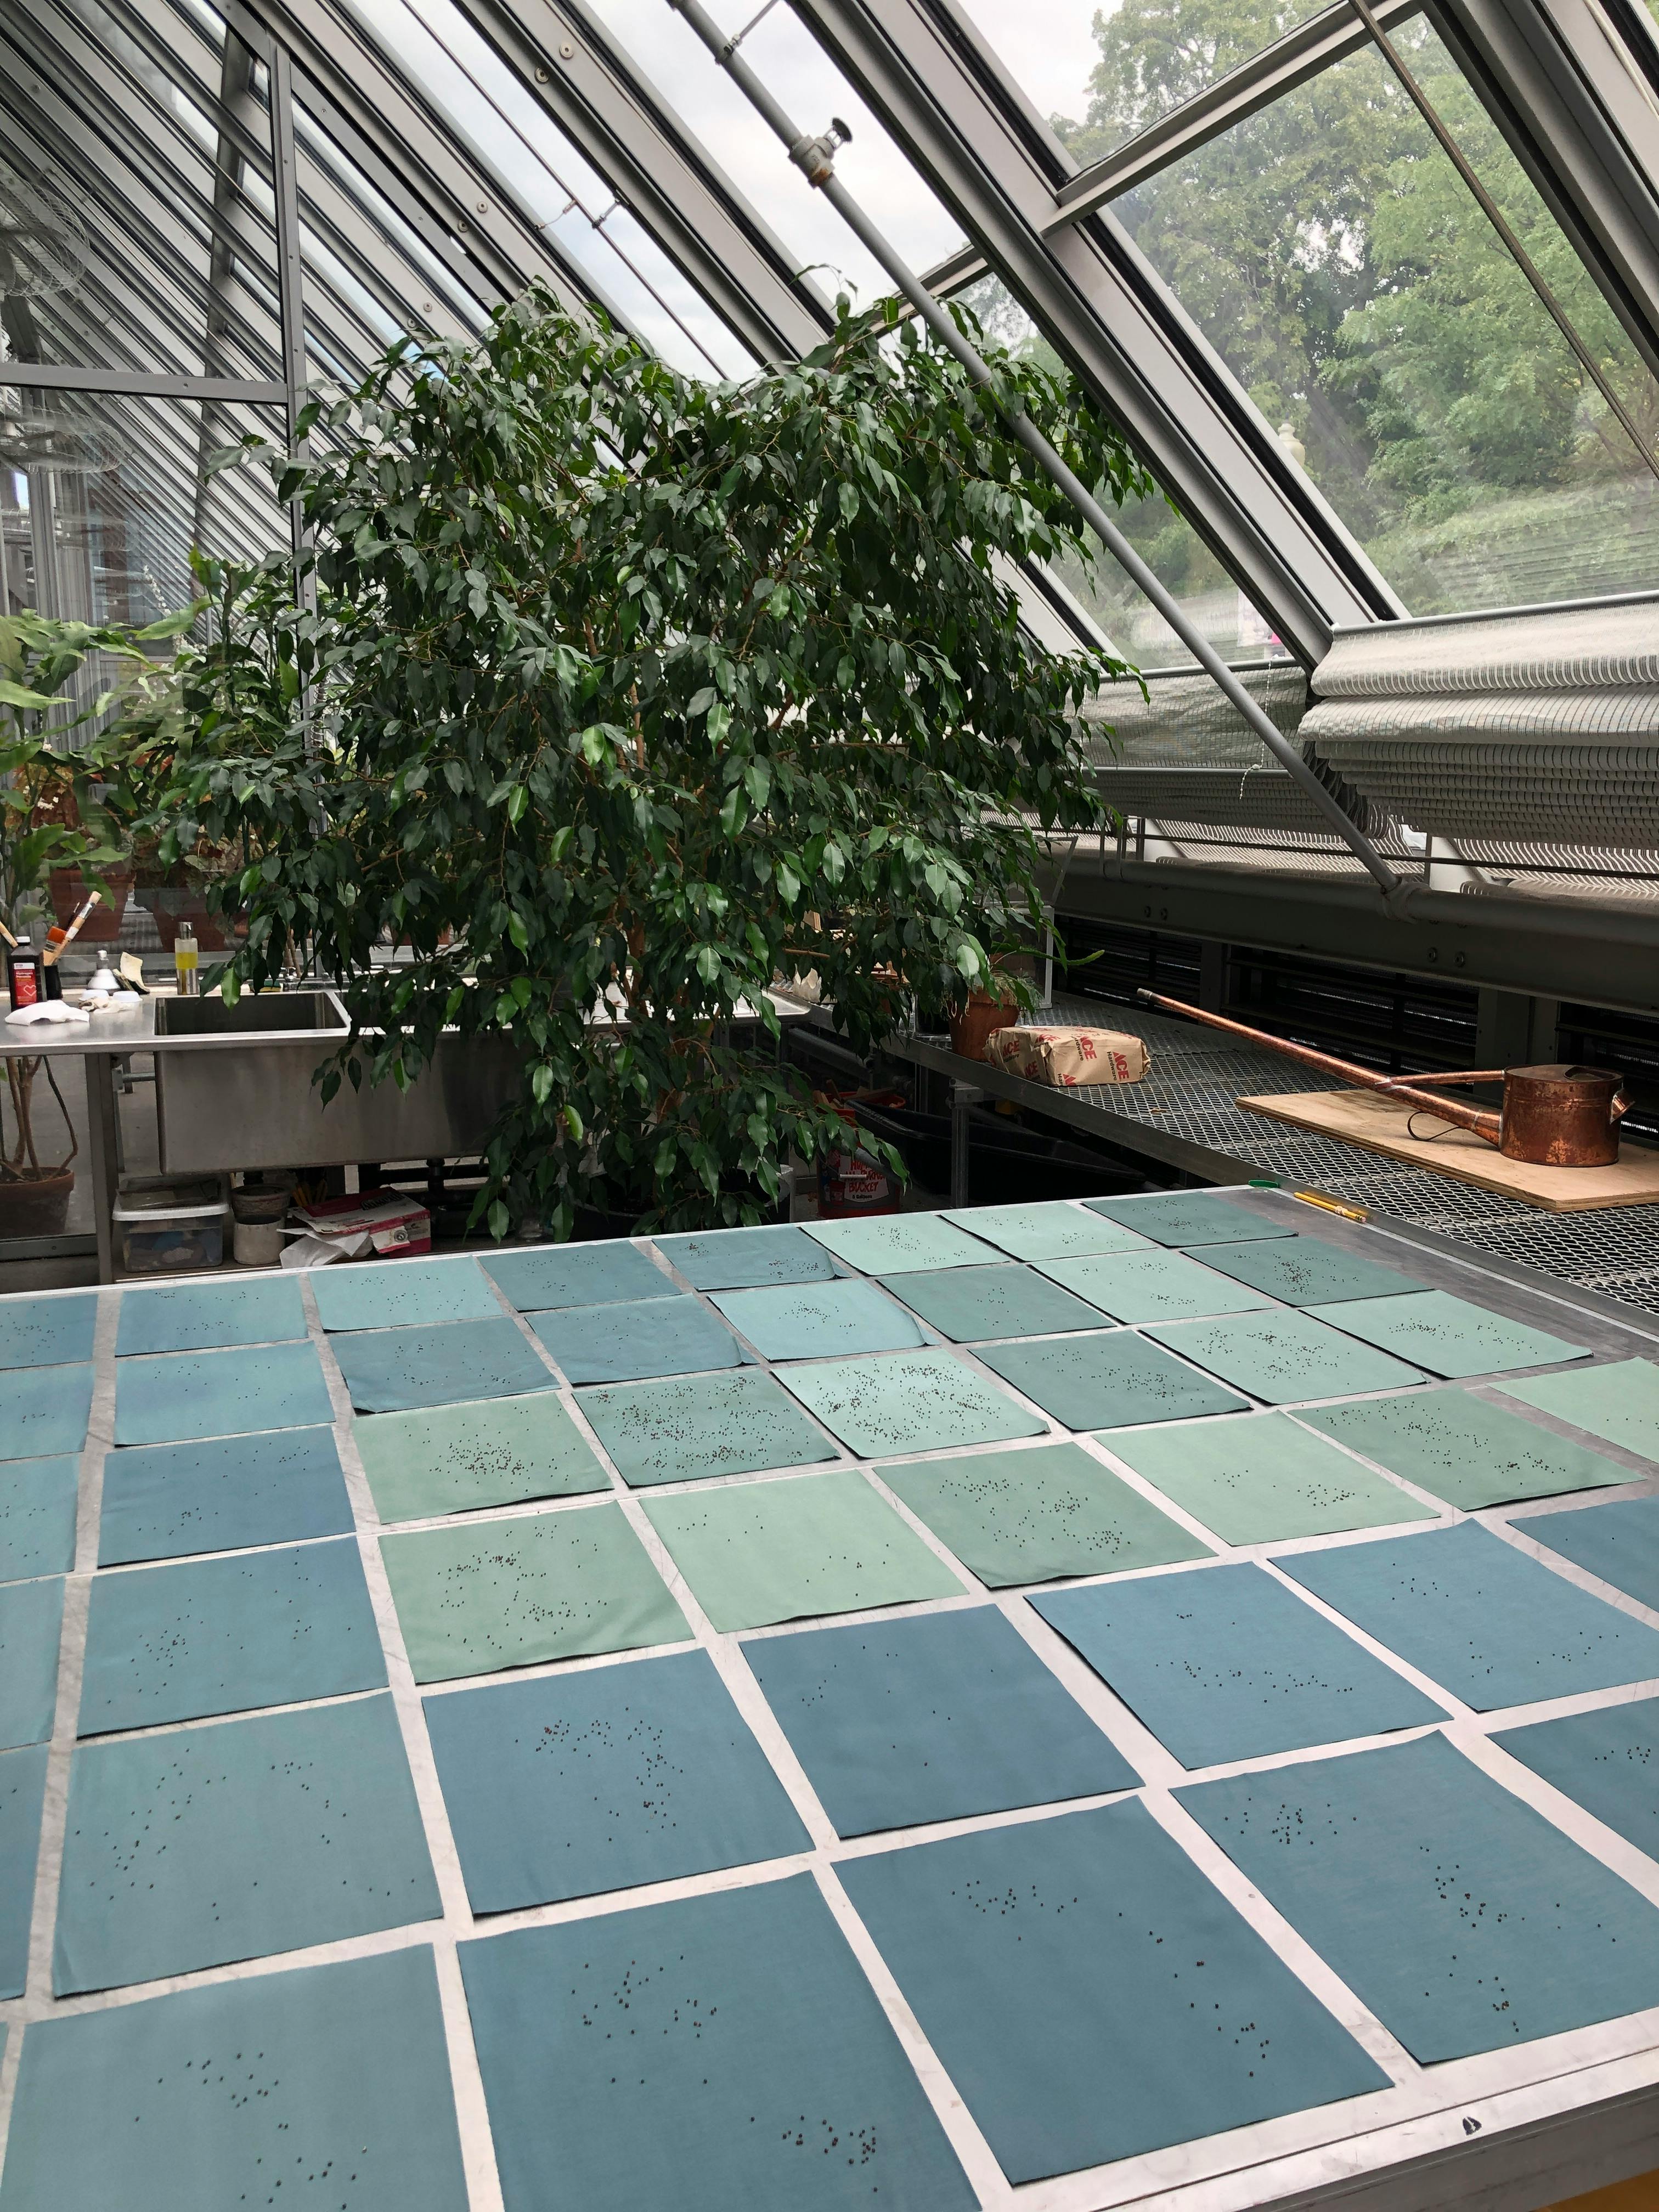 panels of light blue fabric arranged on a table in a greenhouse